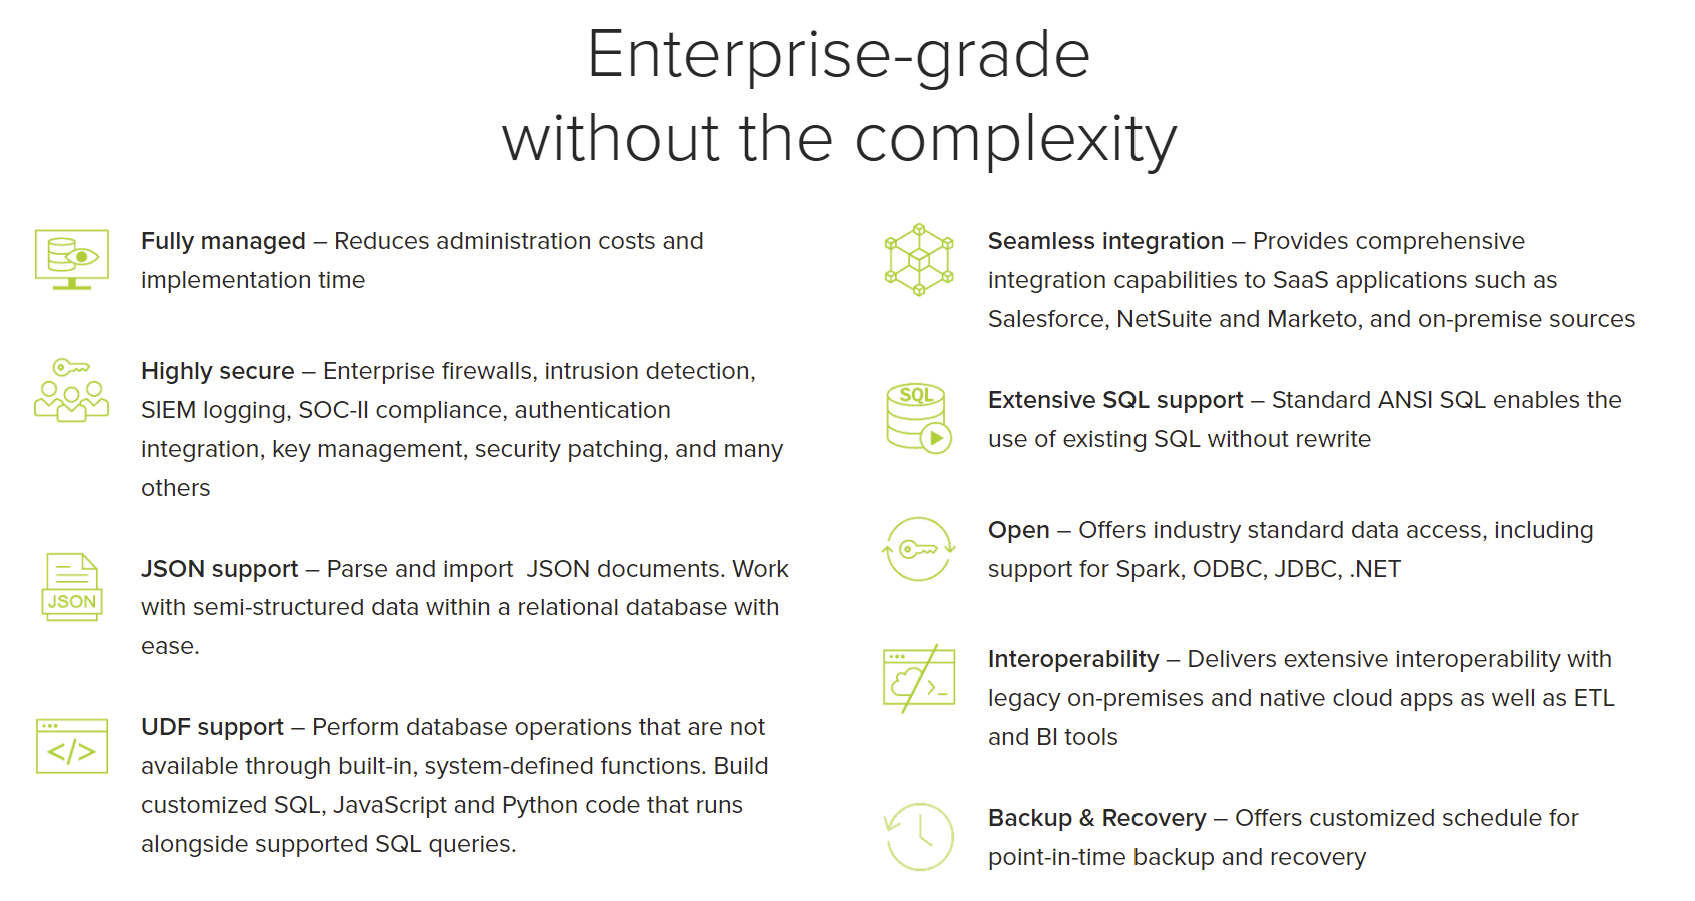 Enterprise-grade without the complexity. Actian Data Platform is fully managed and highly secure. Offers JSON, UDF, and extensive SQL support. Features seamless integration, interoperability, and backup & recovery.